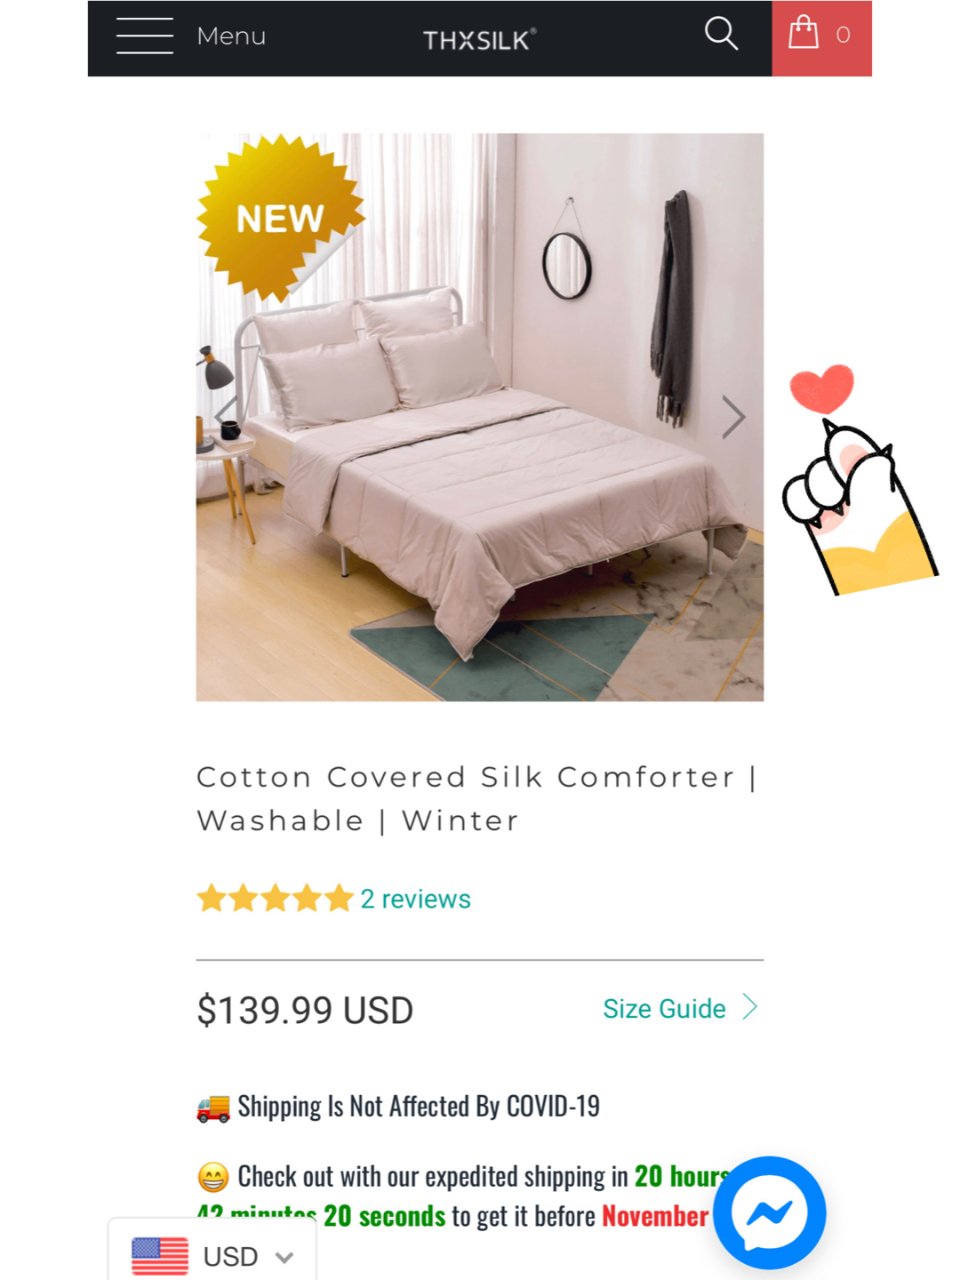 Cotton Covered Silk Comforter | Washable